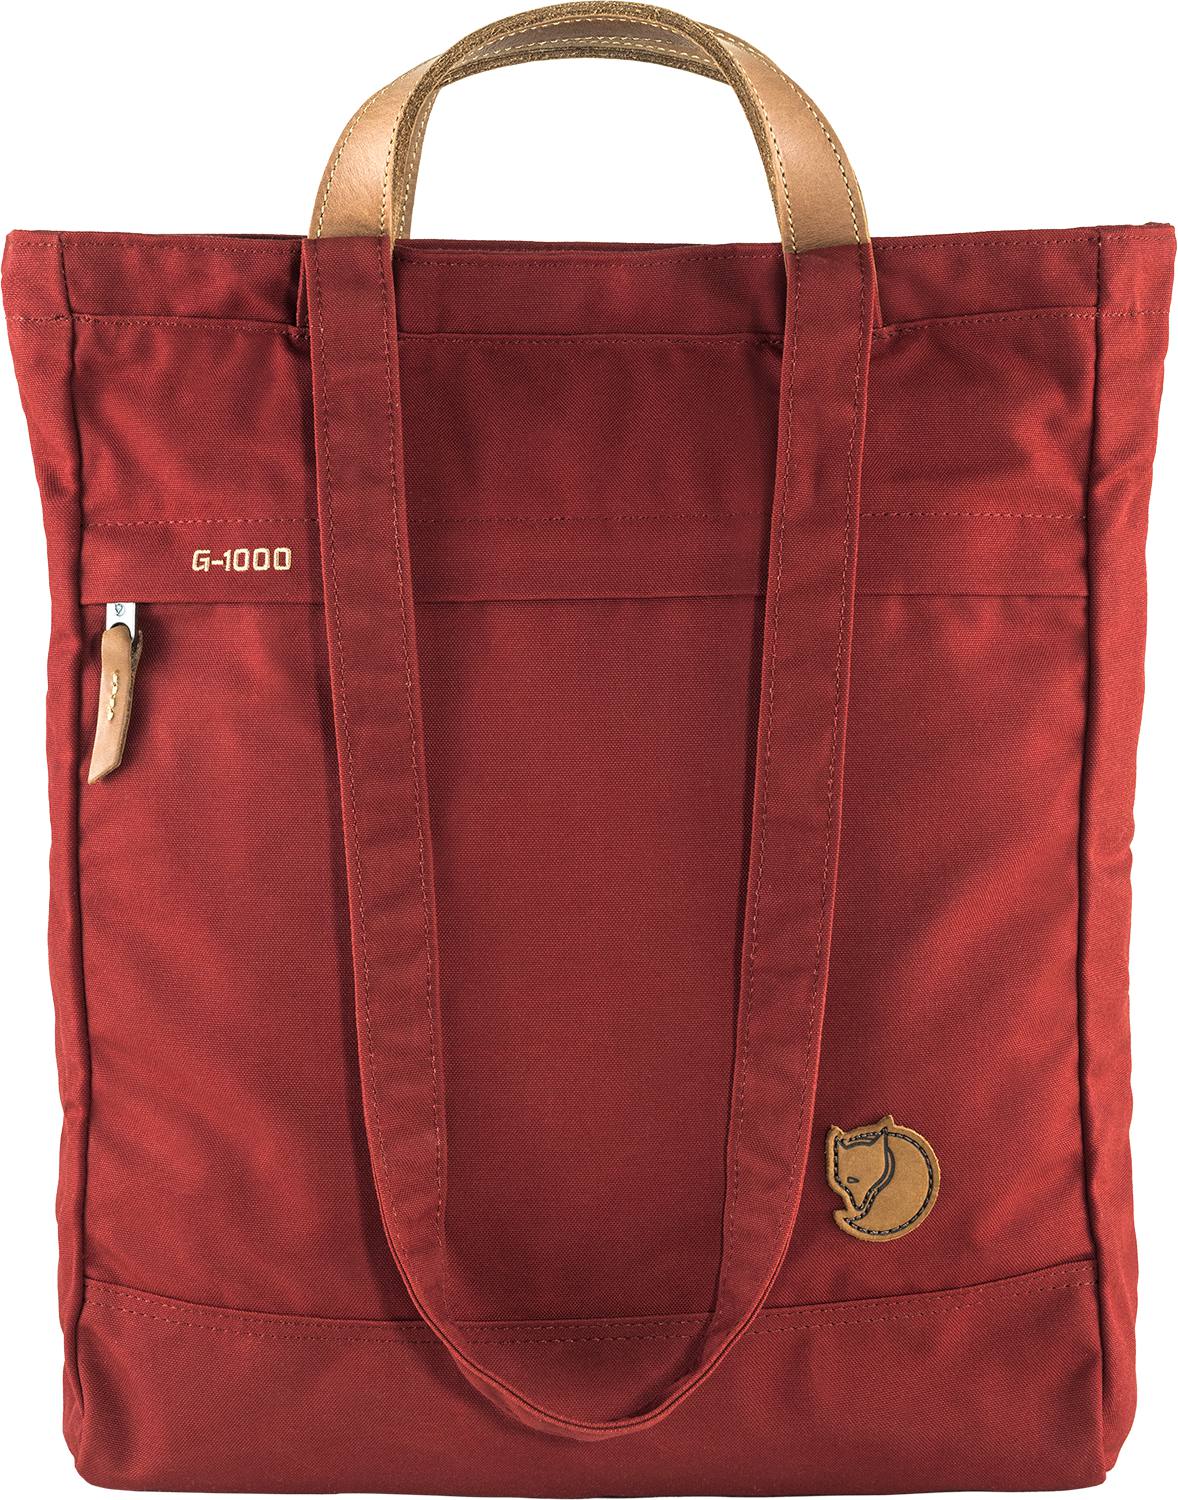 Totepack No. 1 Deep red